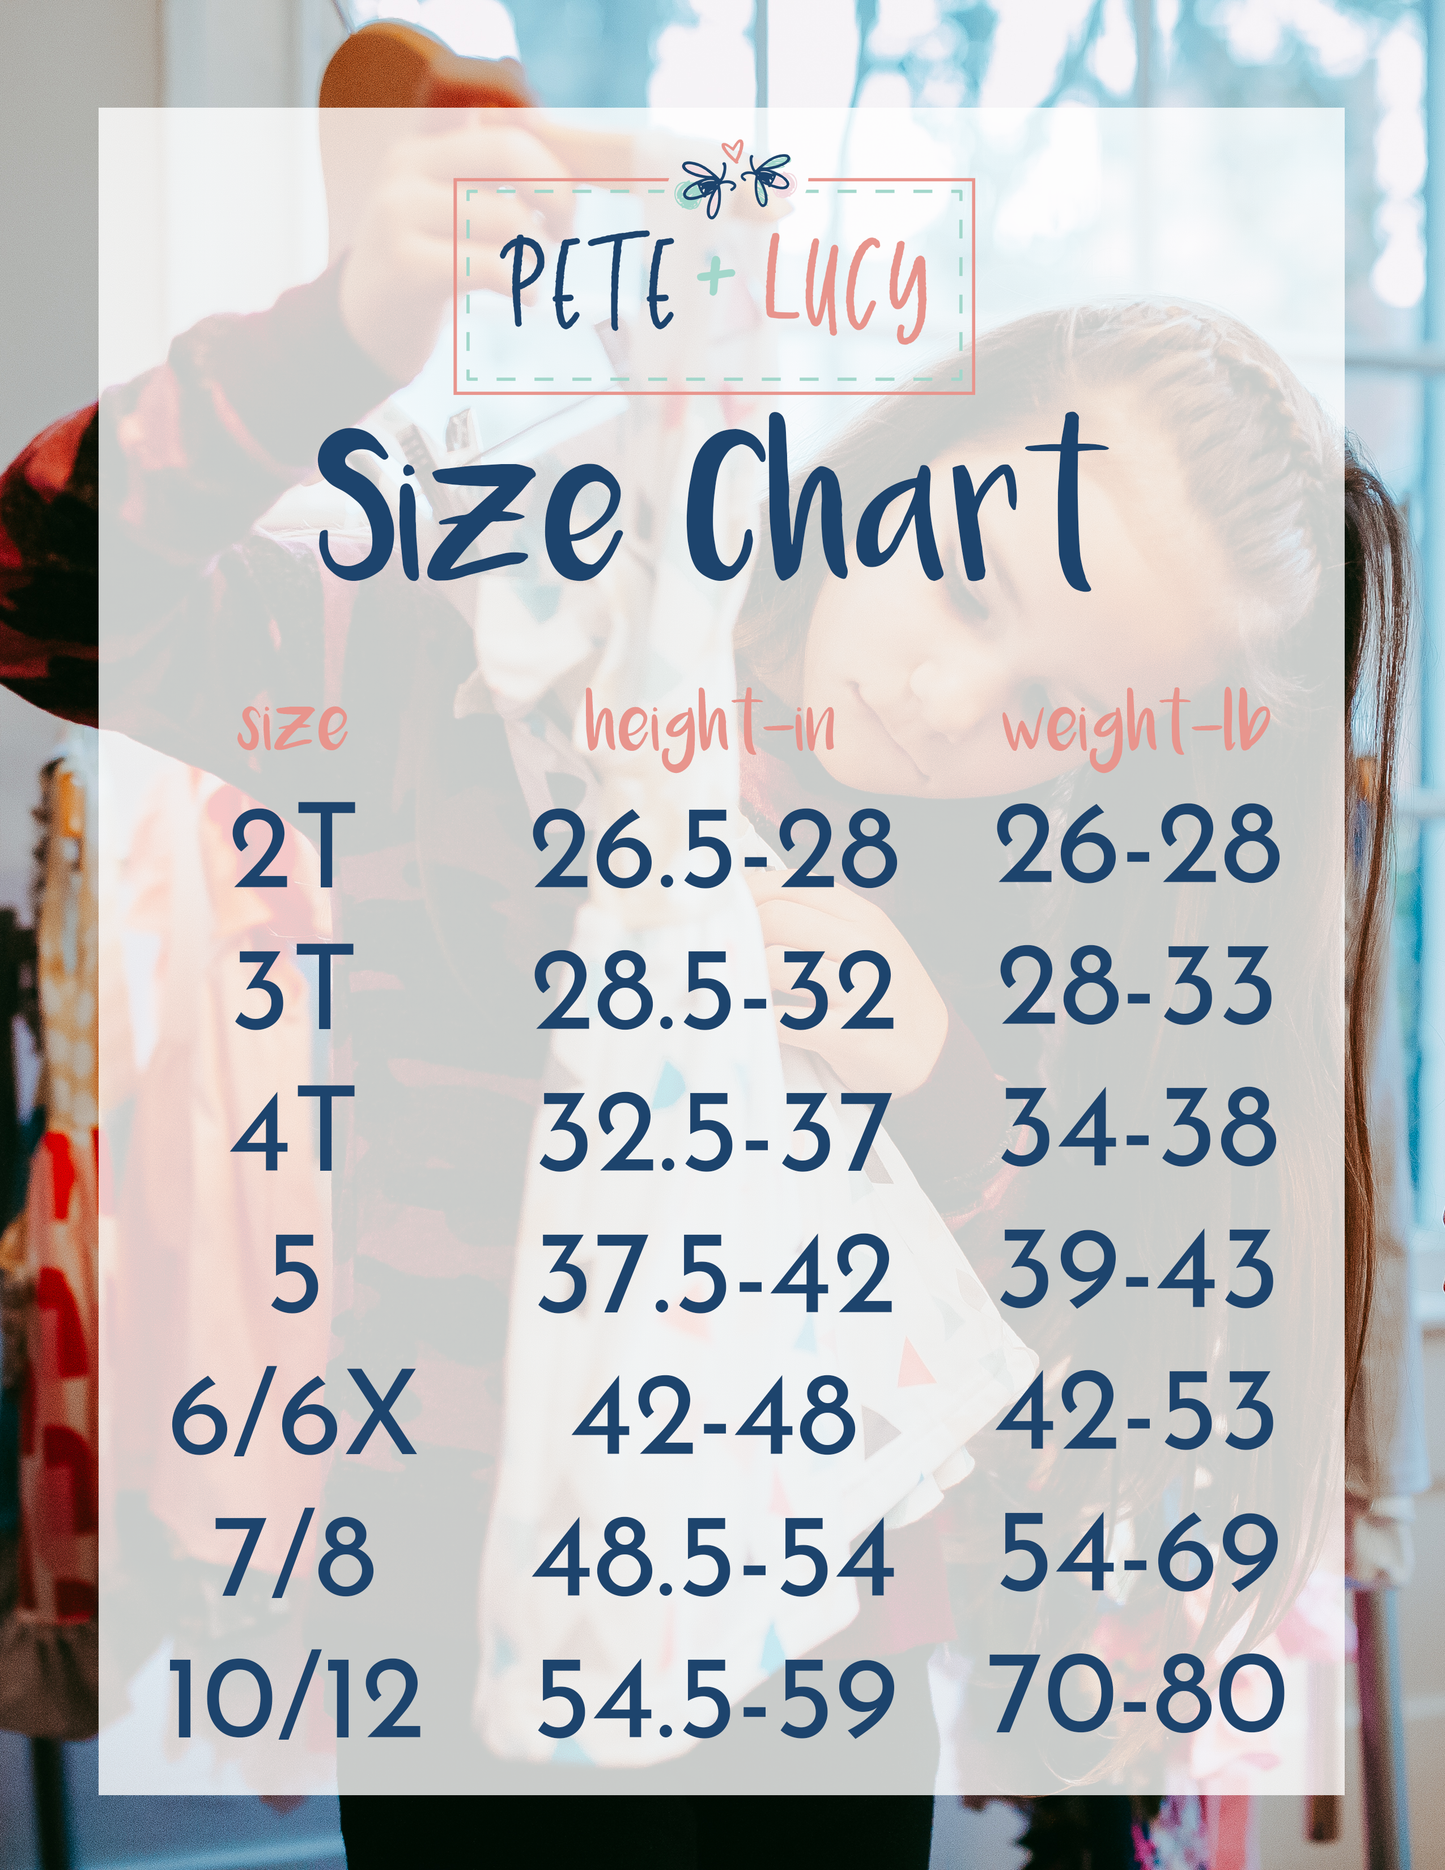 (Preorder) Savannah’s Leopard Tulle by Pete + Lucy